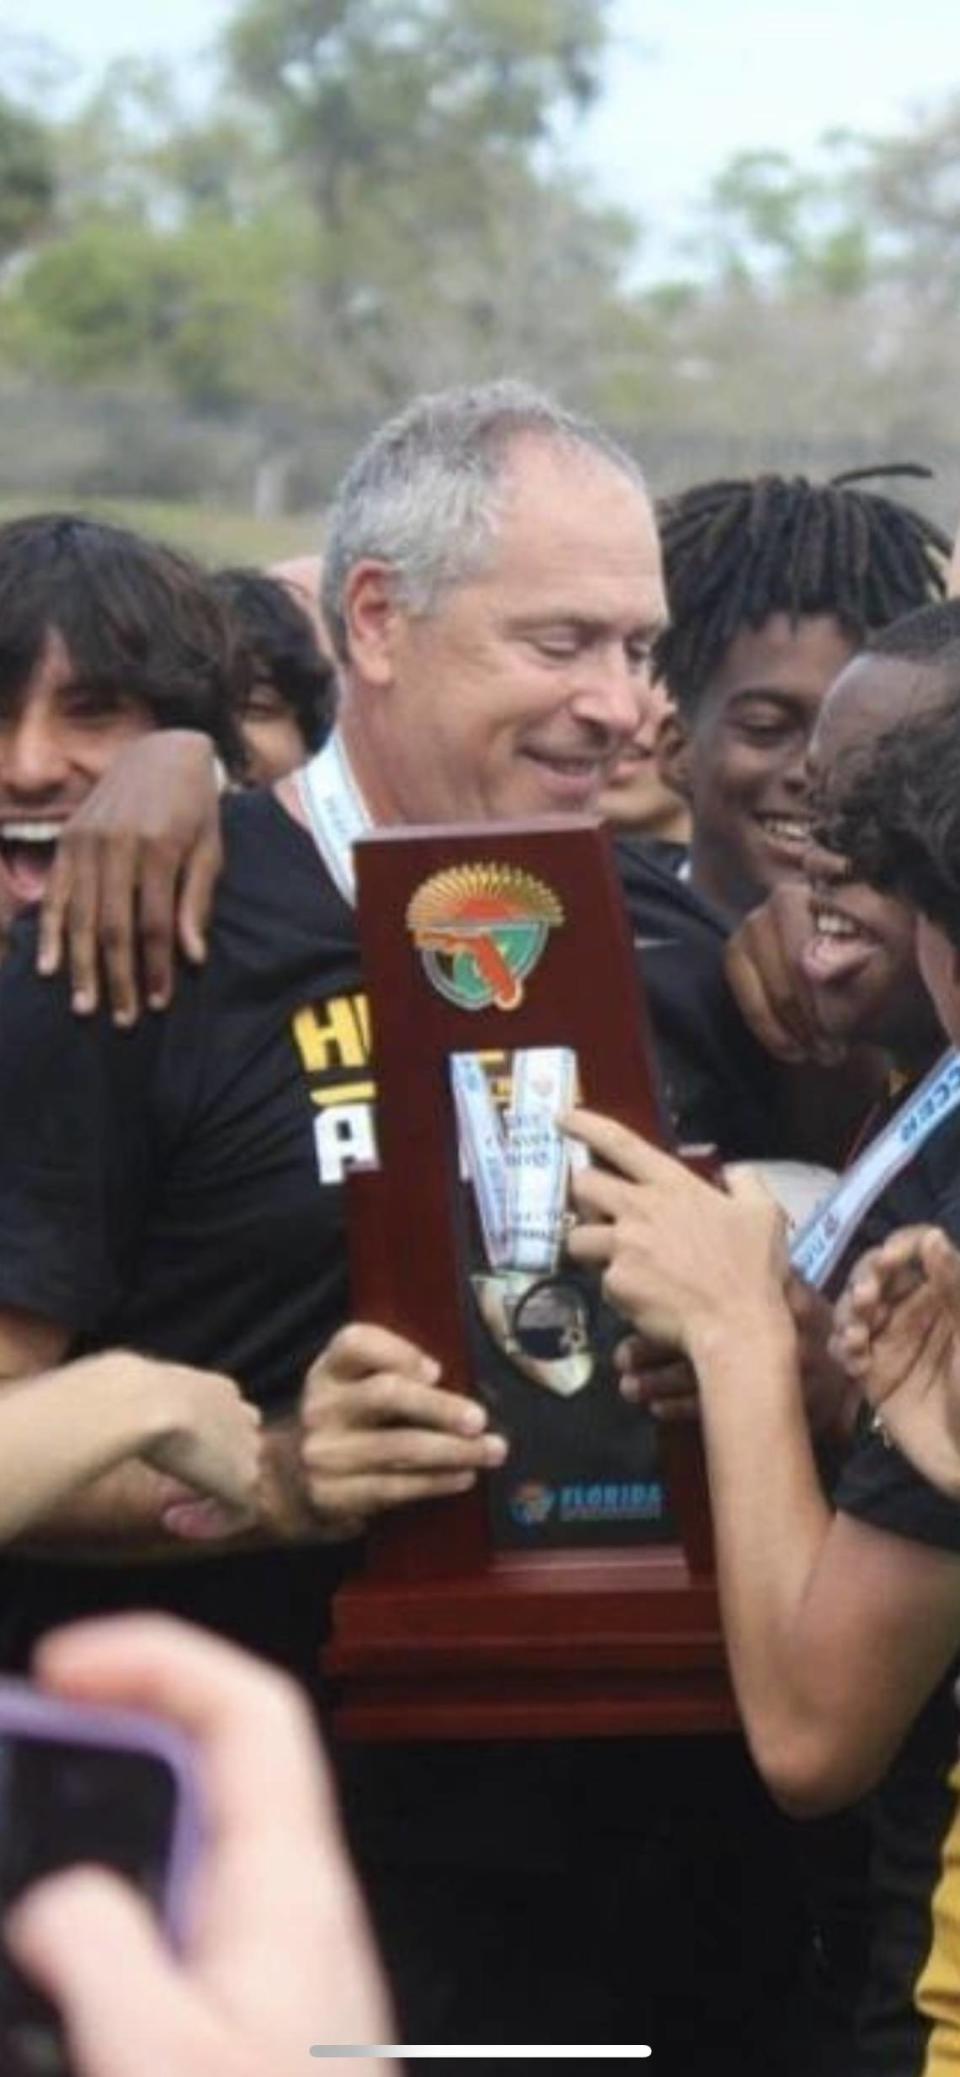 American Heritage coach Todd Goodman is the Miami Herald’s Class 7A-5A Boys’ Soccer Coach of the Year after leading the Patriots to the Class 5A state championship.